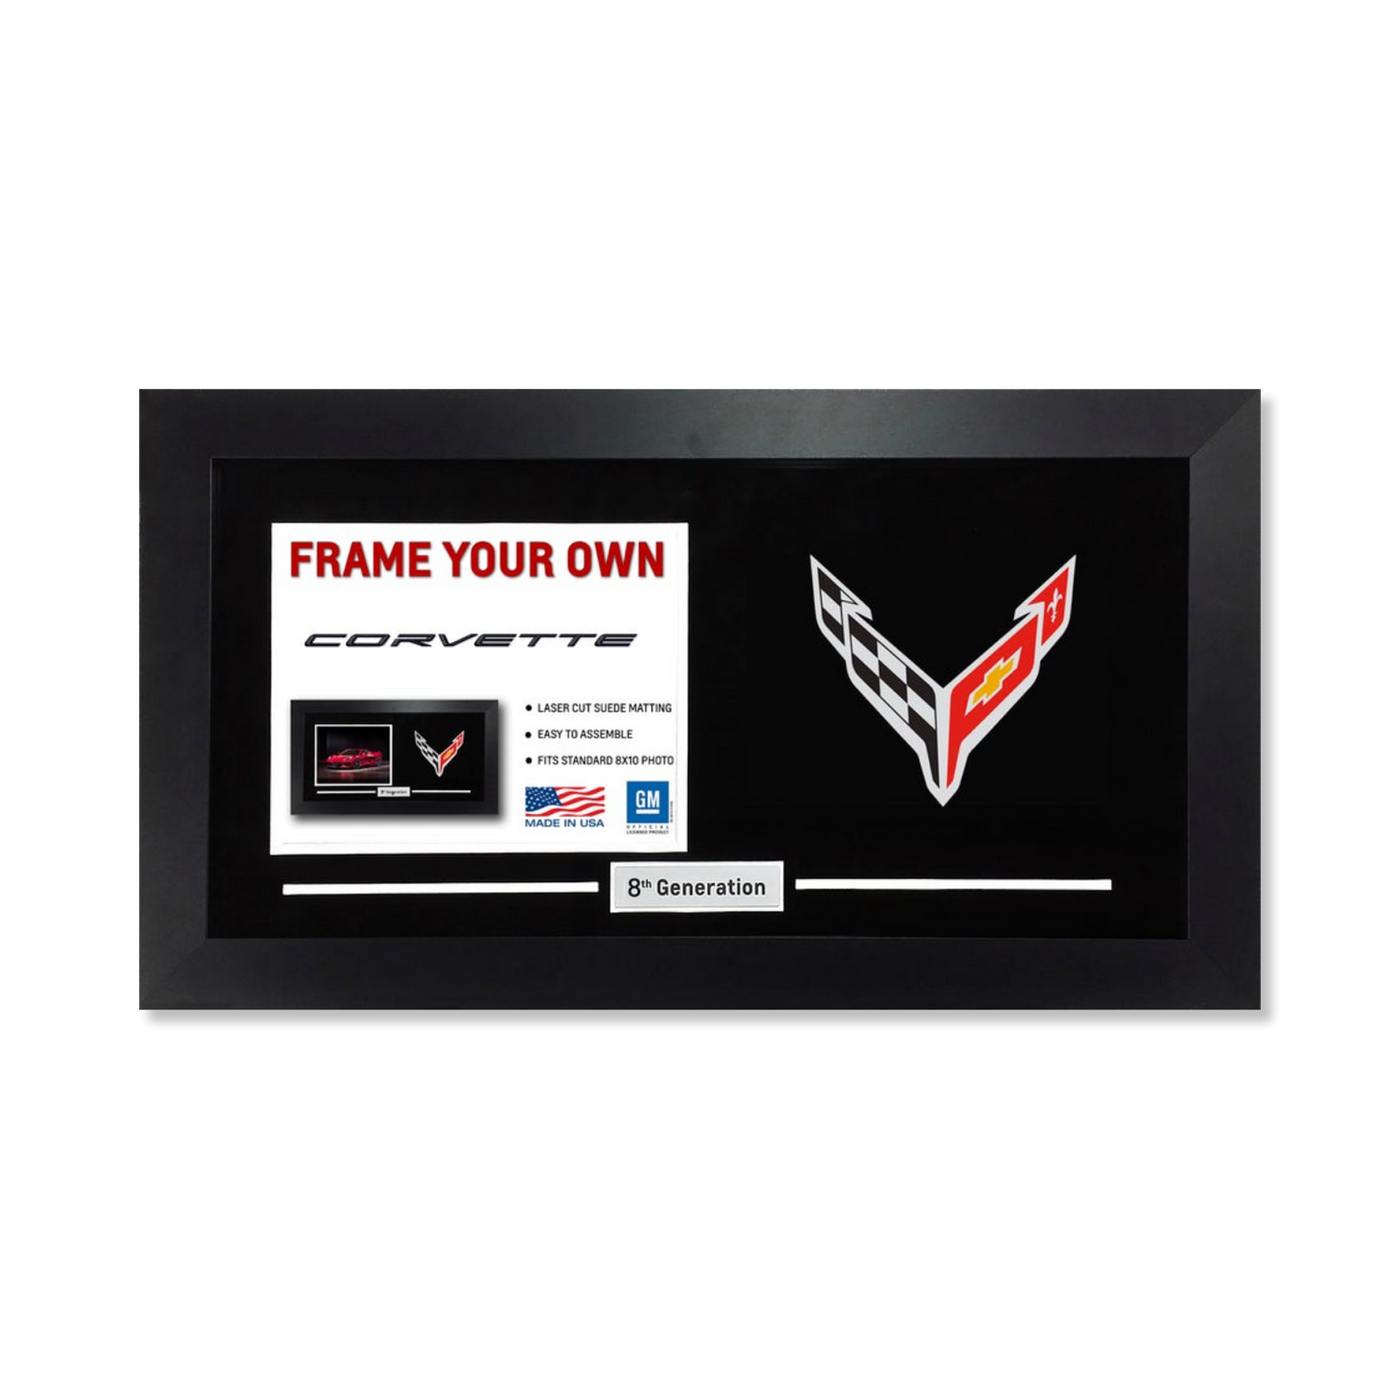 C8 Corvette "Frame Your Own" Picture Frame